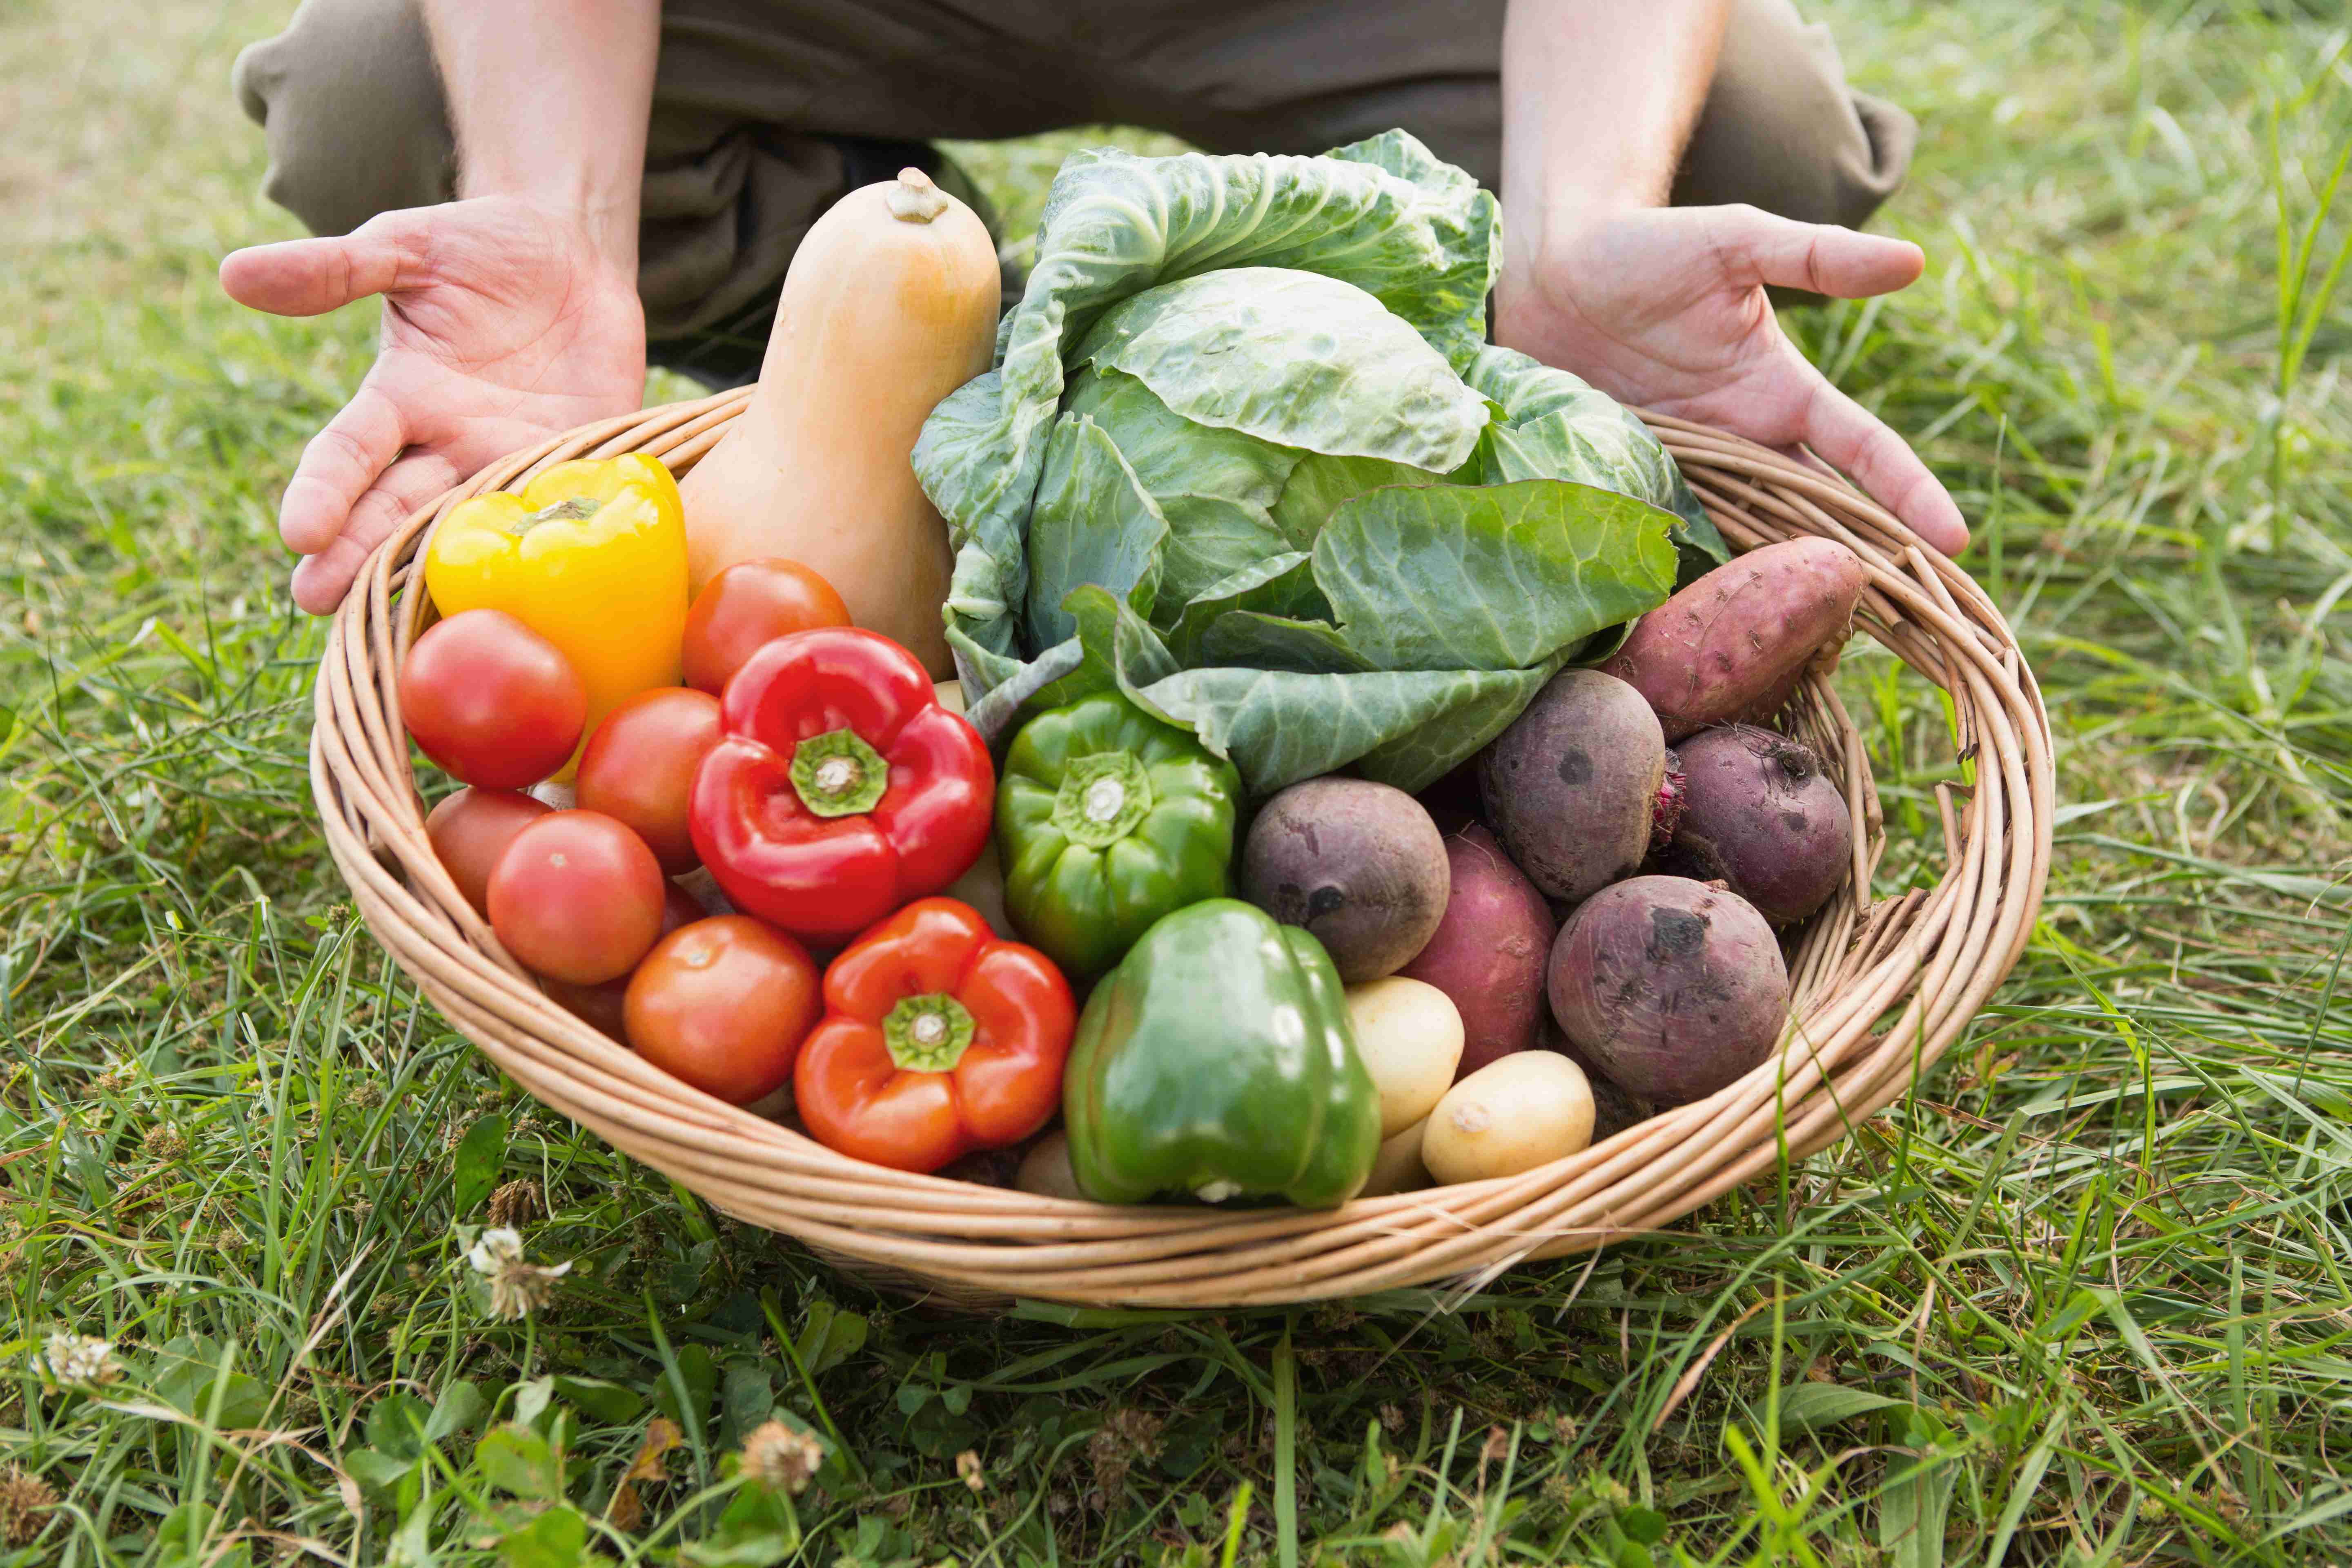 Guide to Growing Vegetables in your Garden